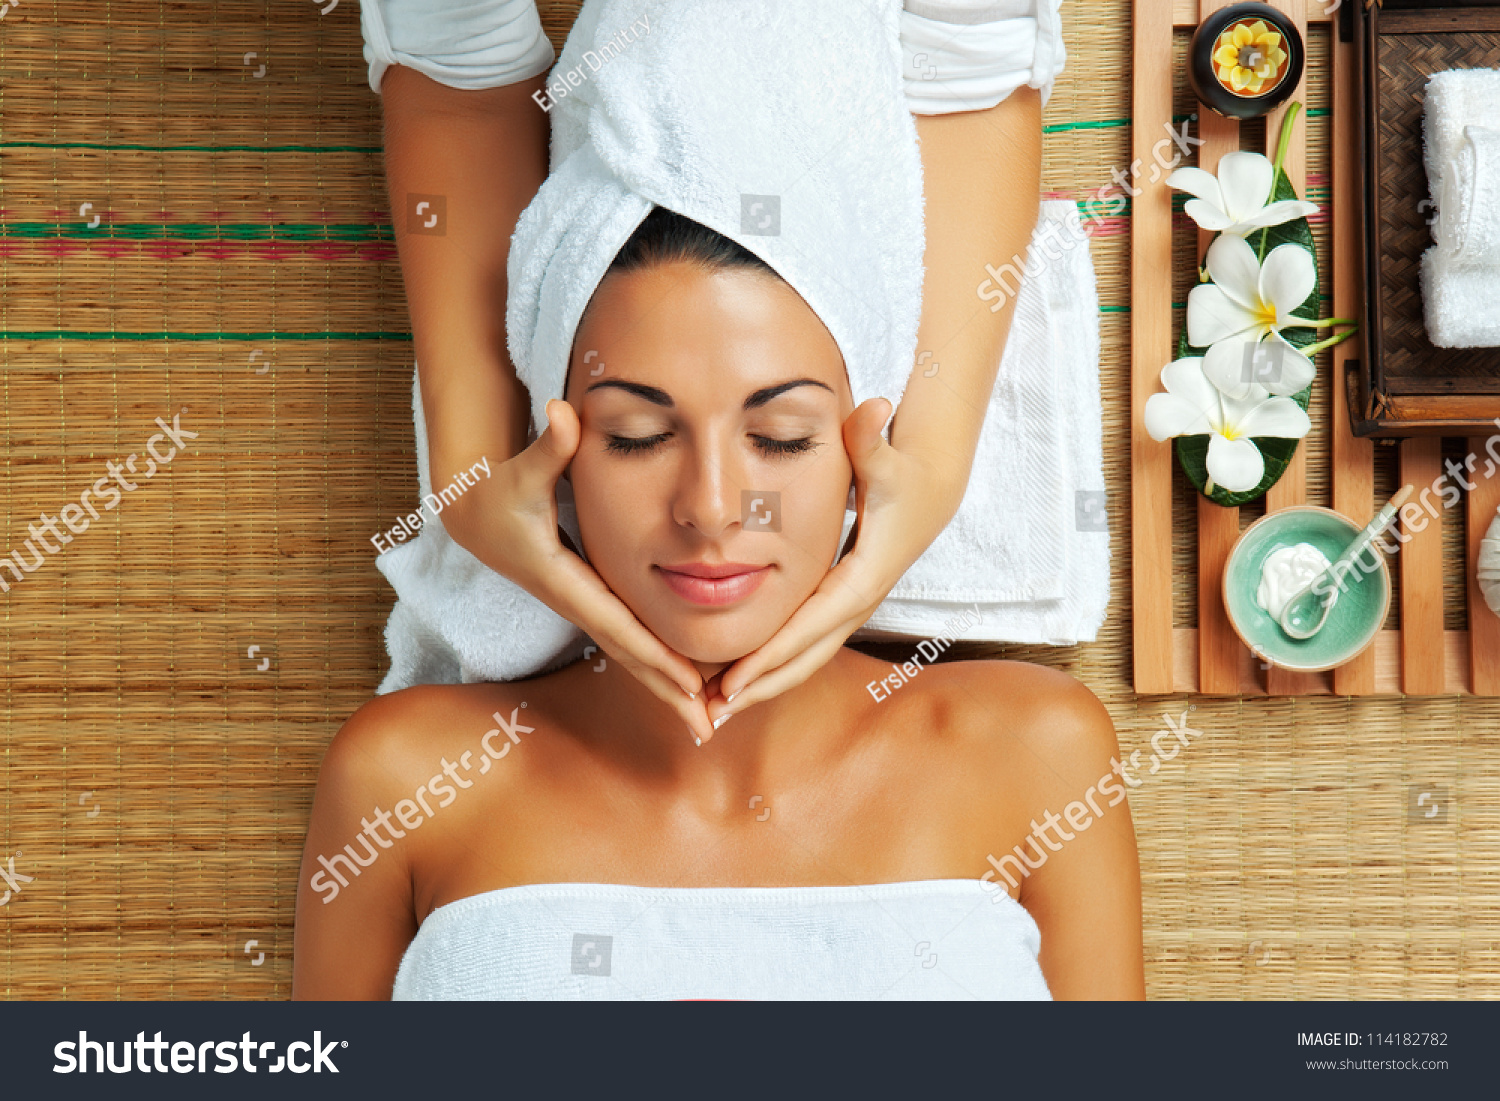 portrait of young beautiful woman in spa environment #114182782